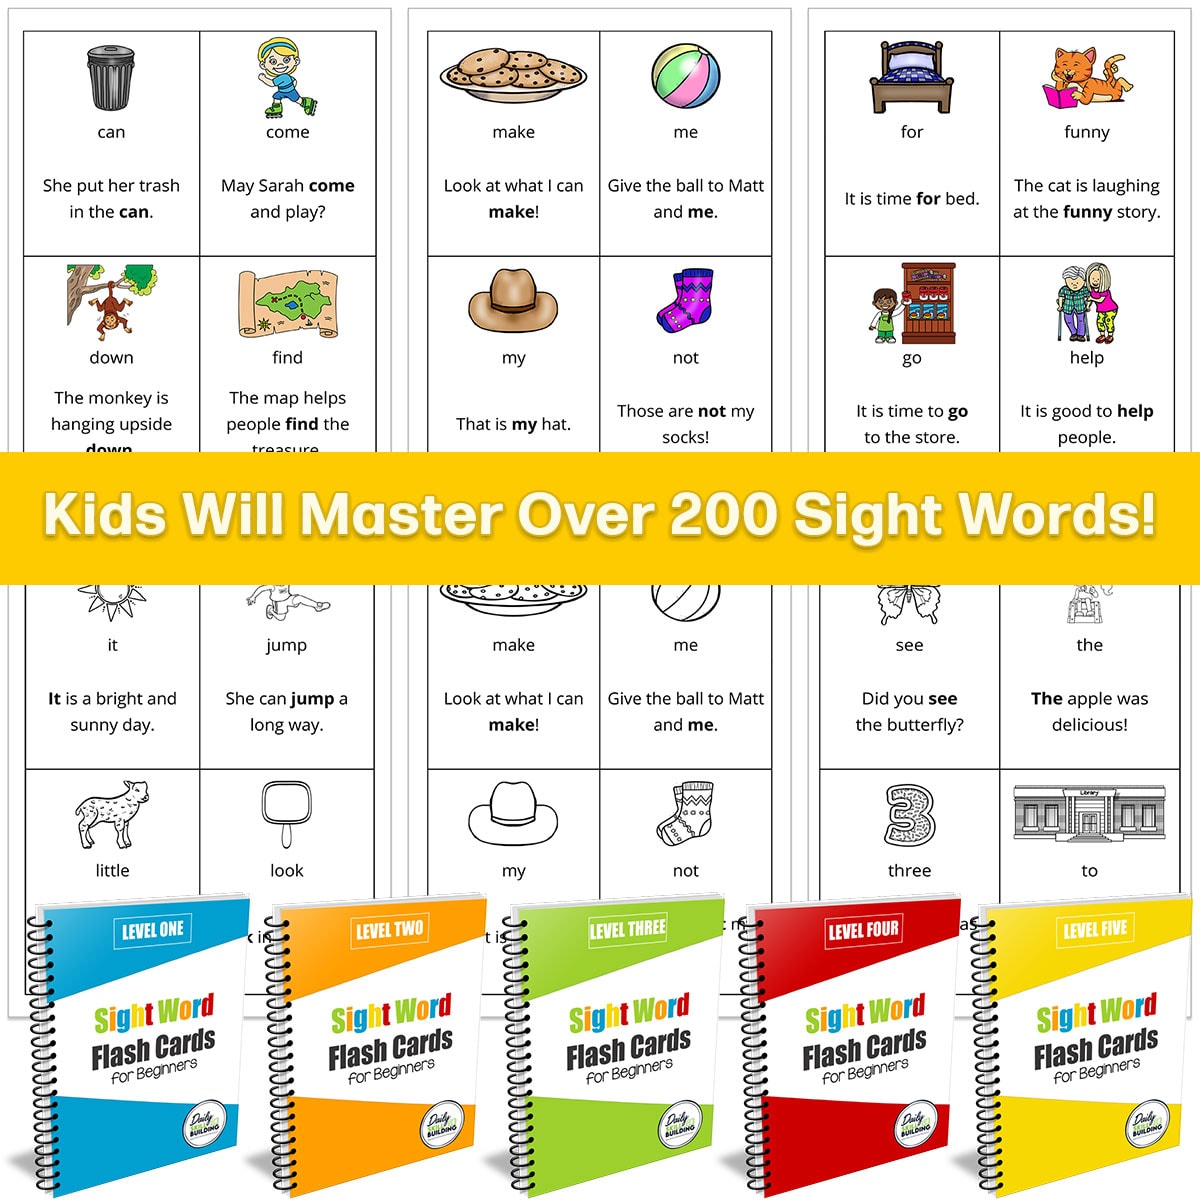 Printable Sight Words Flash Cards and Book Covers for 5 Levels